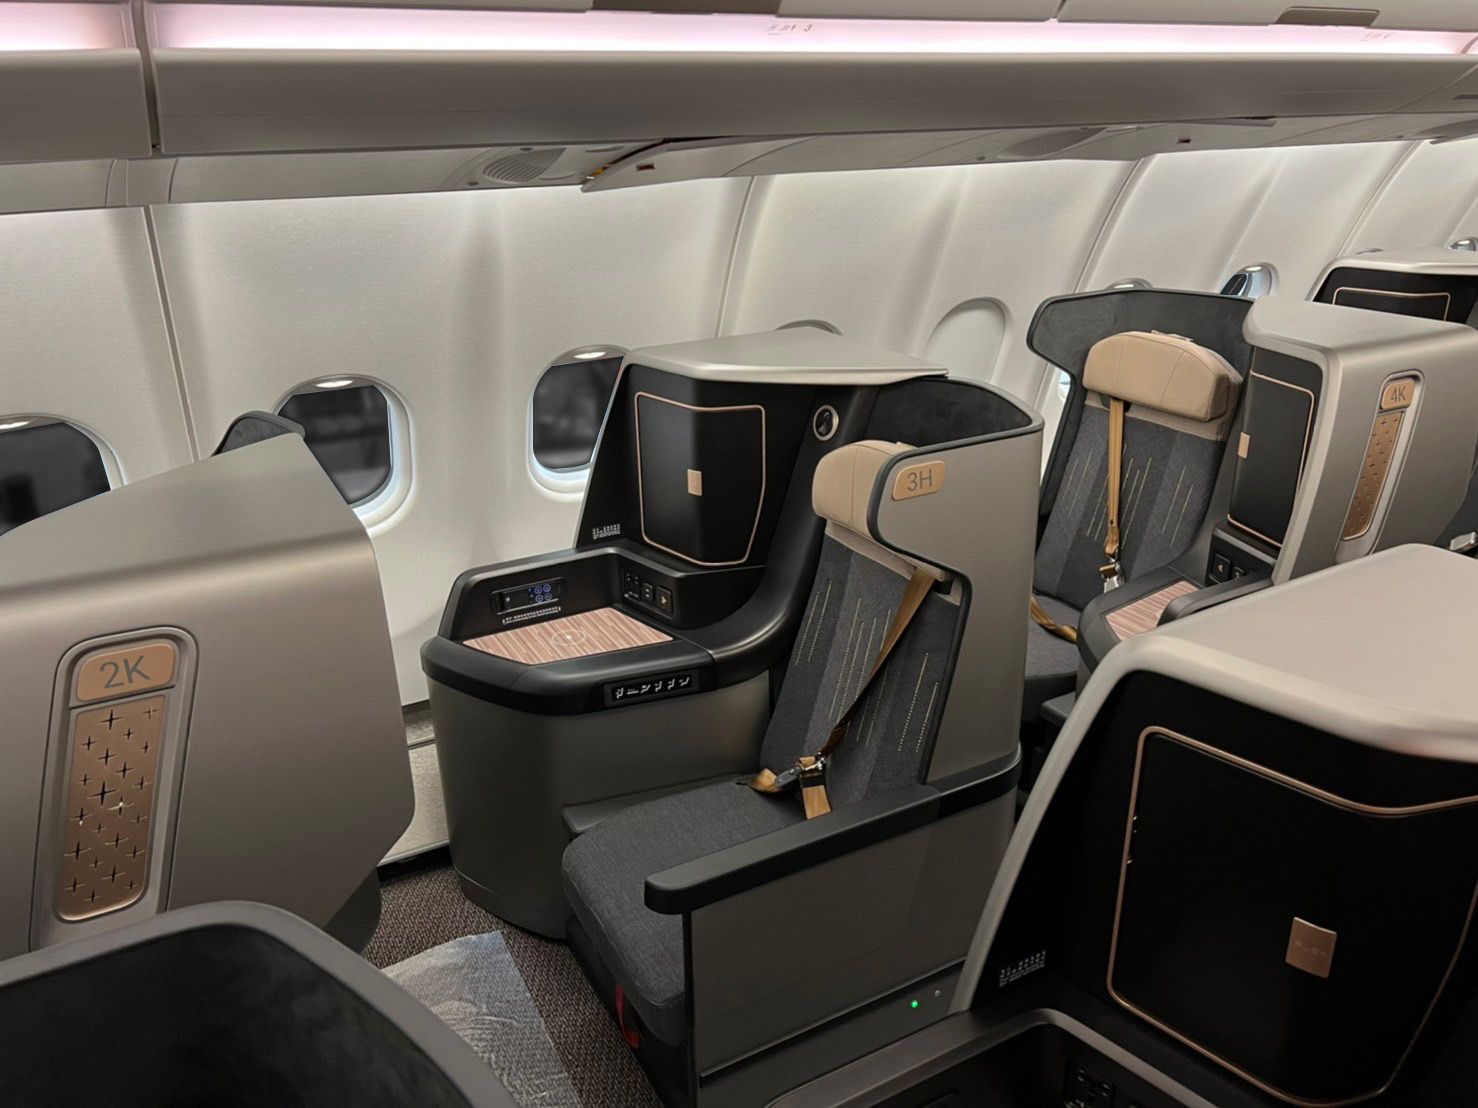 1-2-1 Business Class with High Privacy Pods